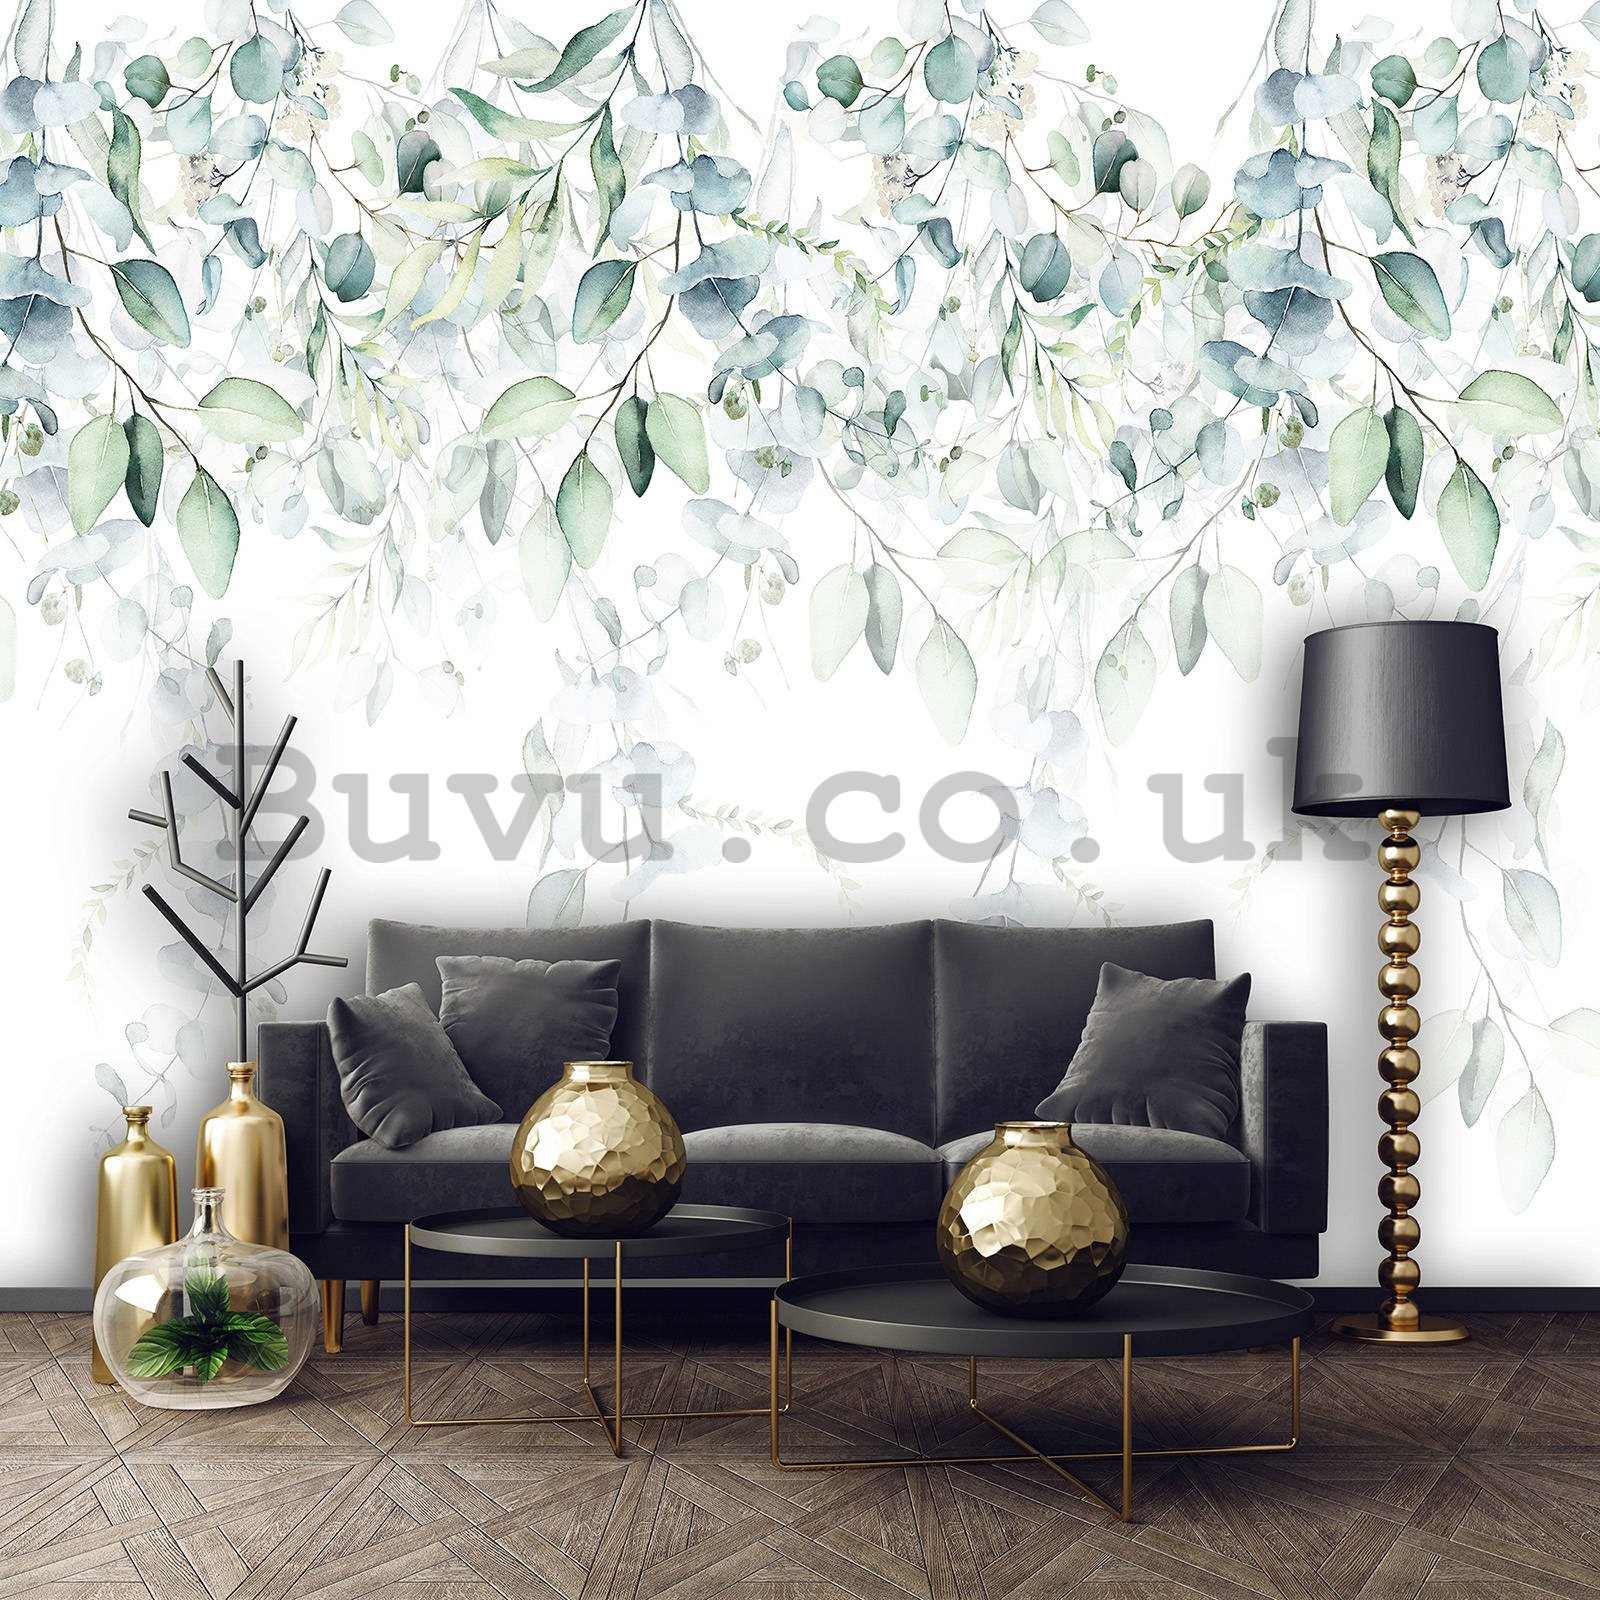 Wall mural vlies: Painted turquoise climbing plants - 254x184 cm